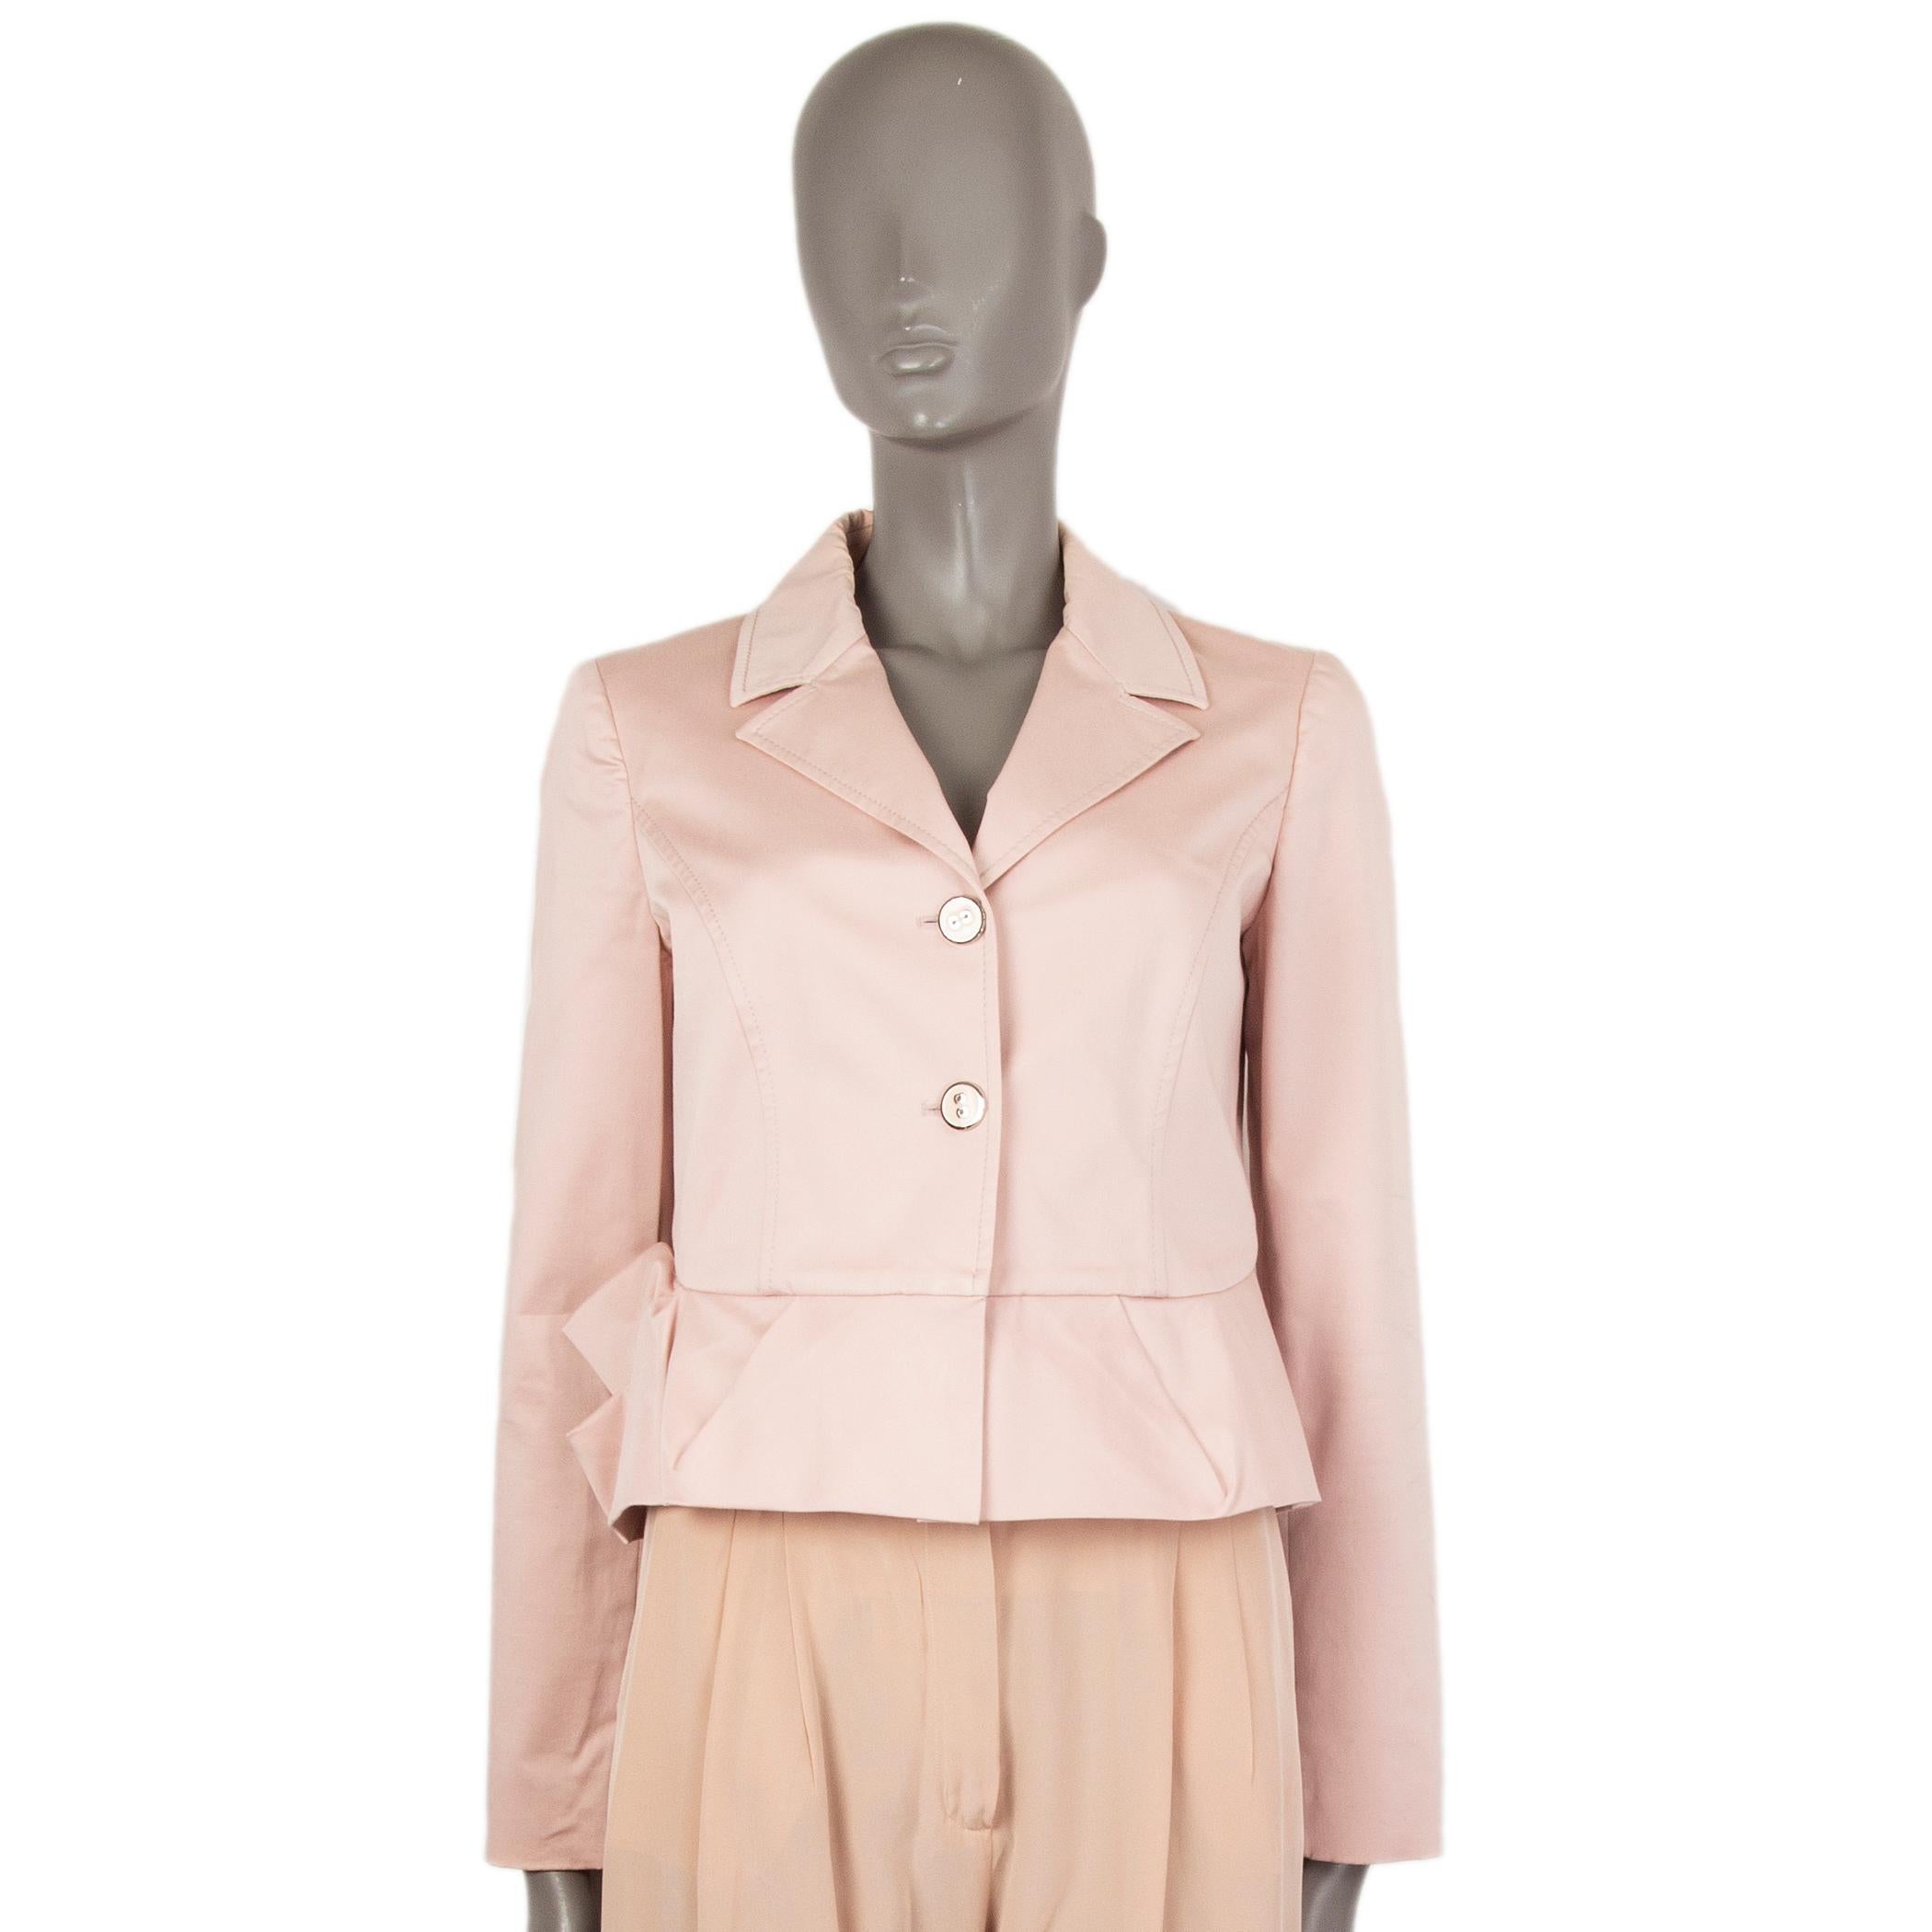 Women's RED VALENTINO pale pink cotton CROPPED FLUTE Jacket 42 M